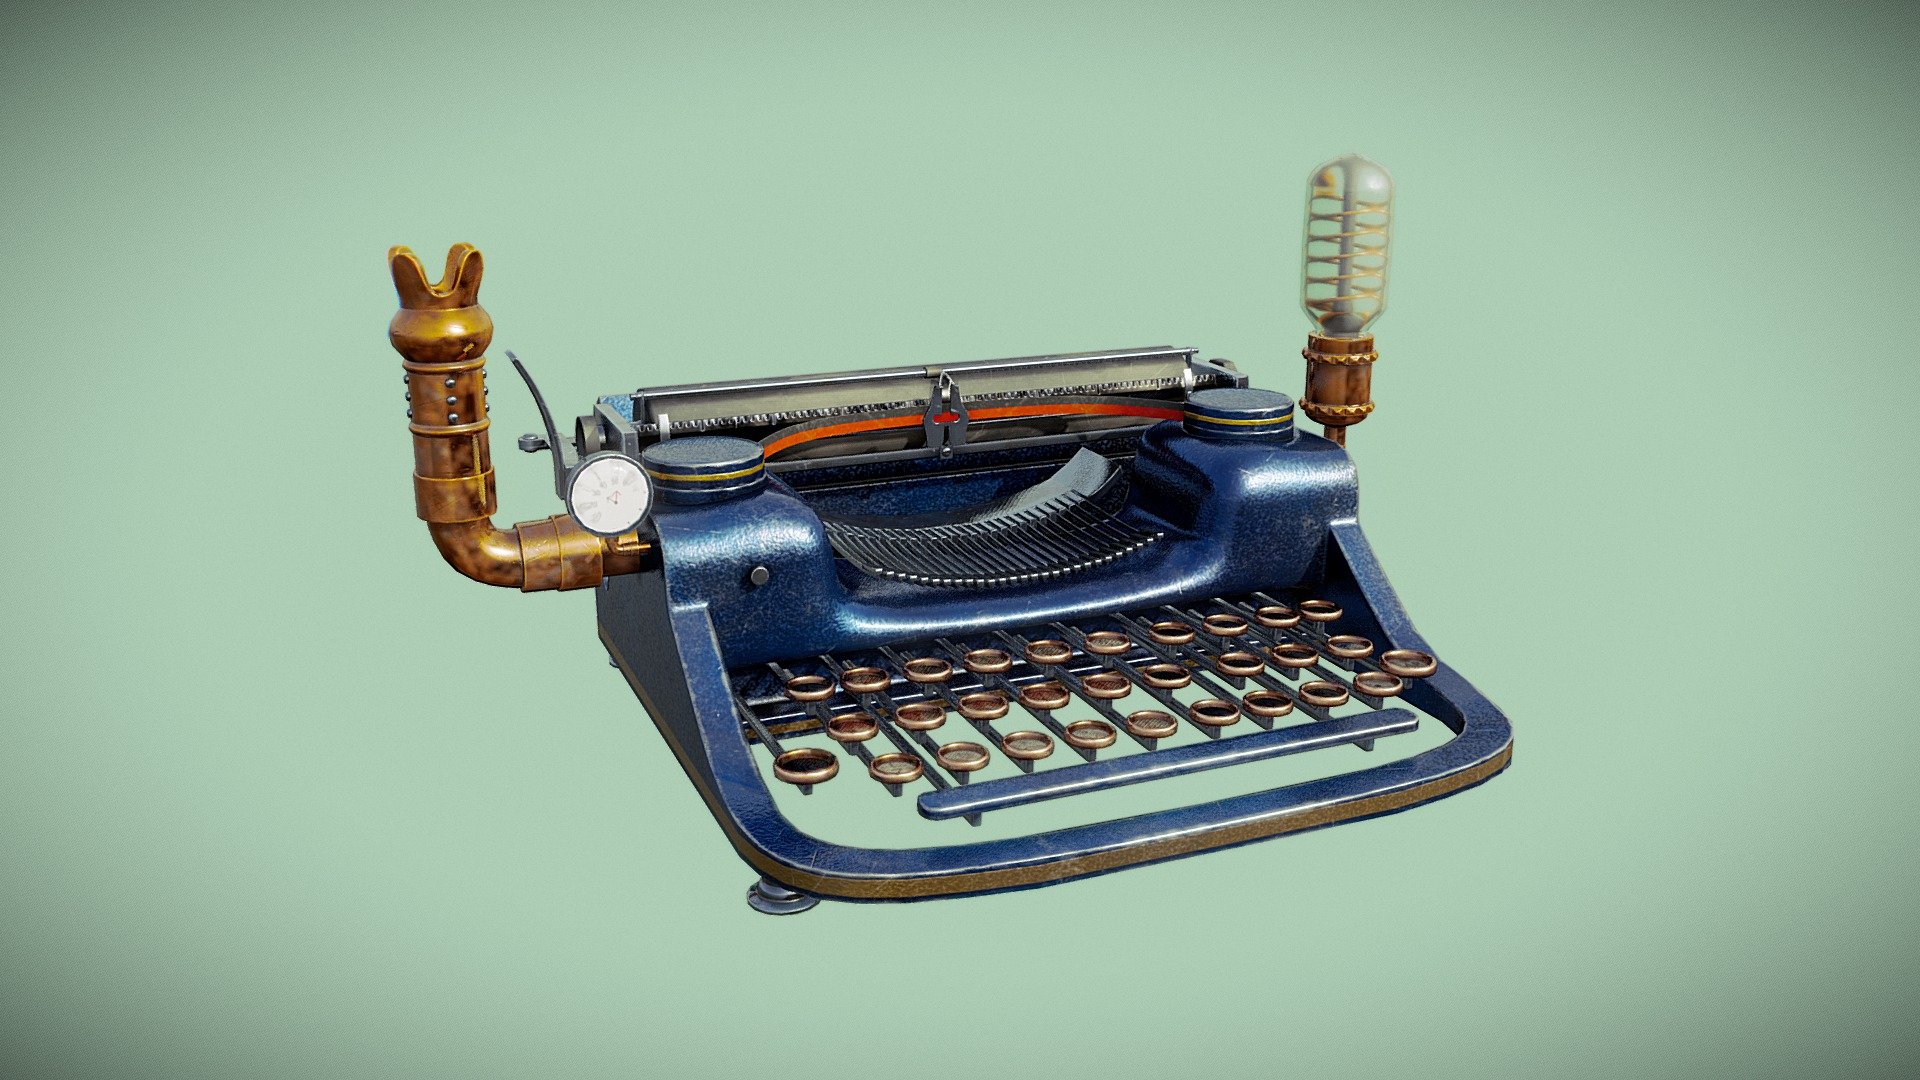 Typewriter with steam punk style, made in blender and textured in substance painter 3d model